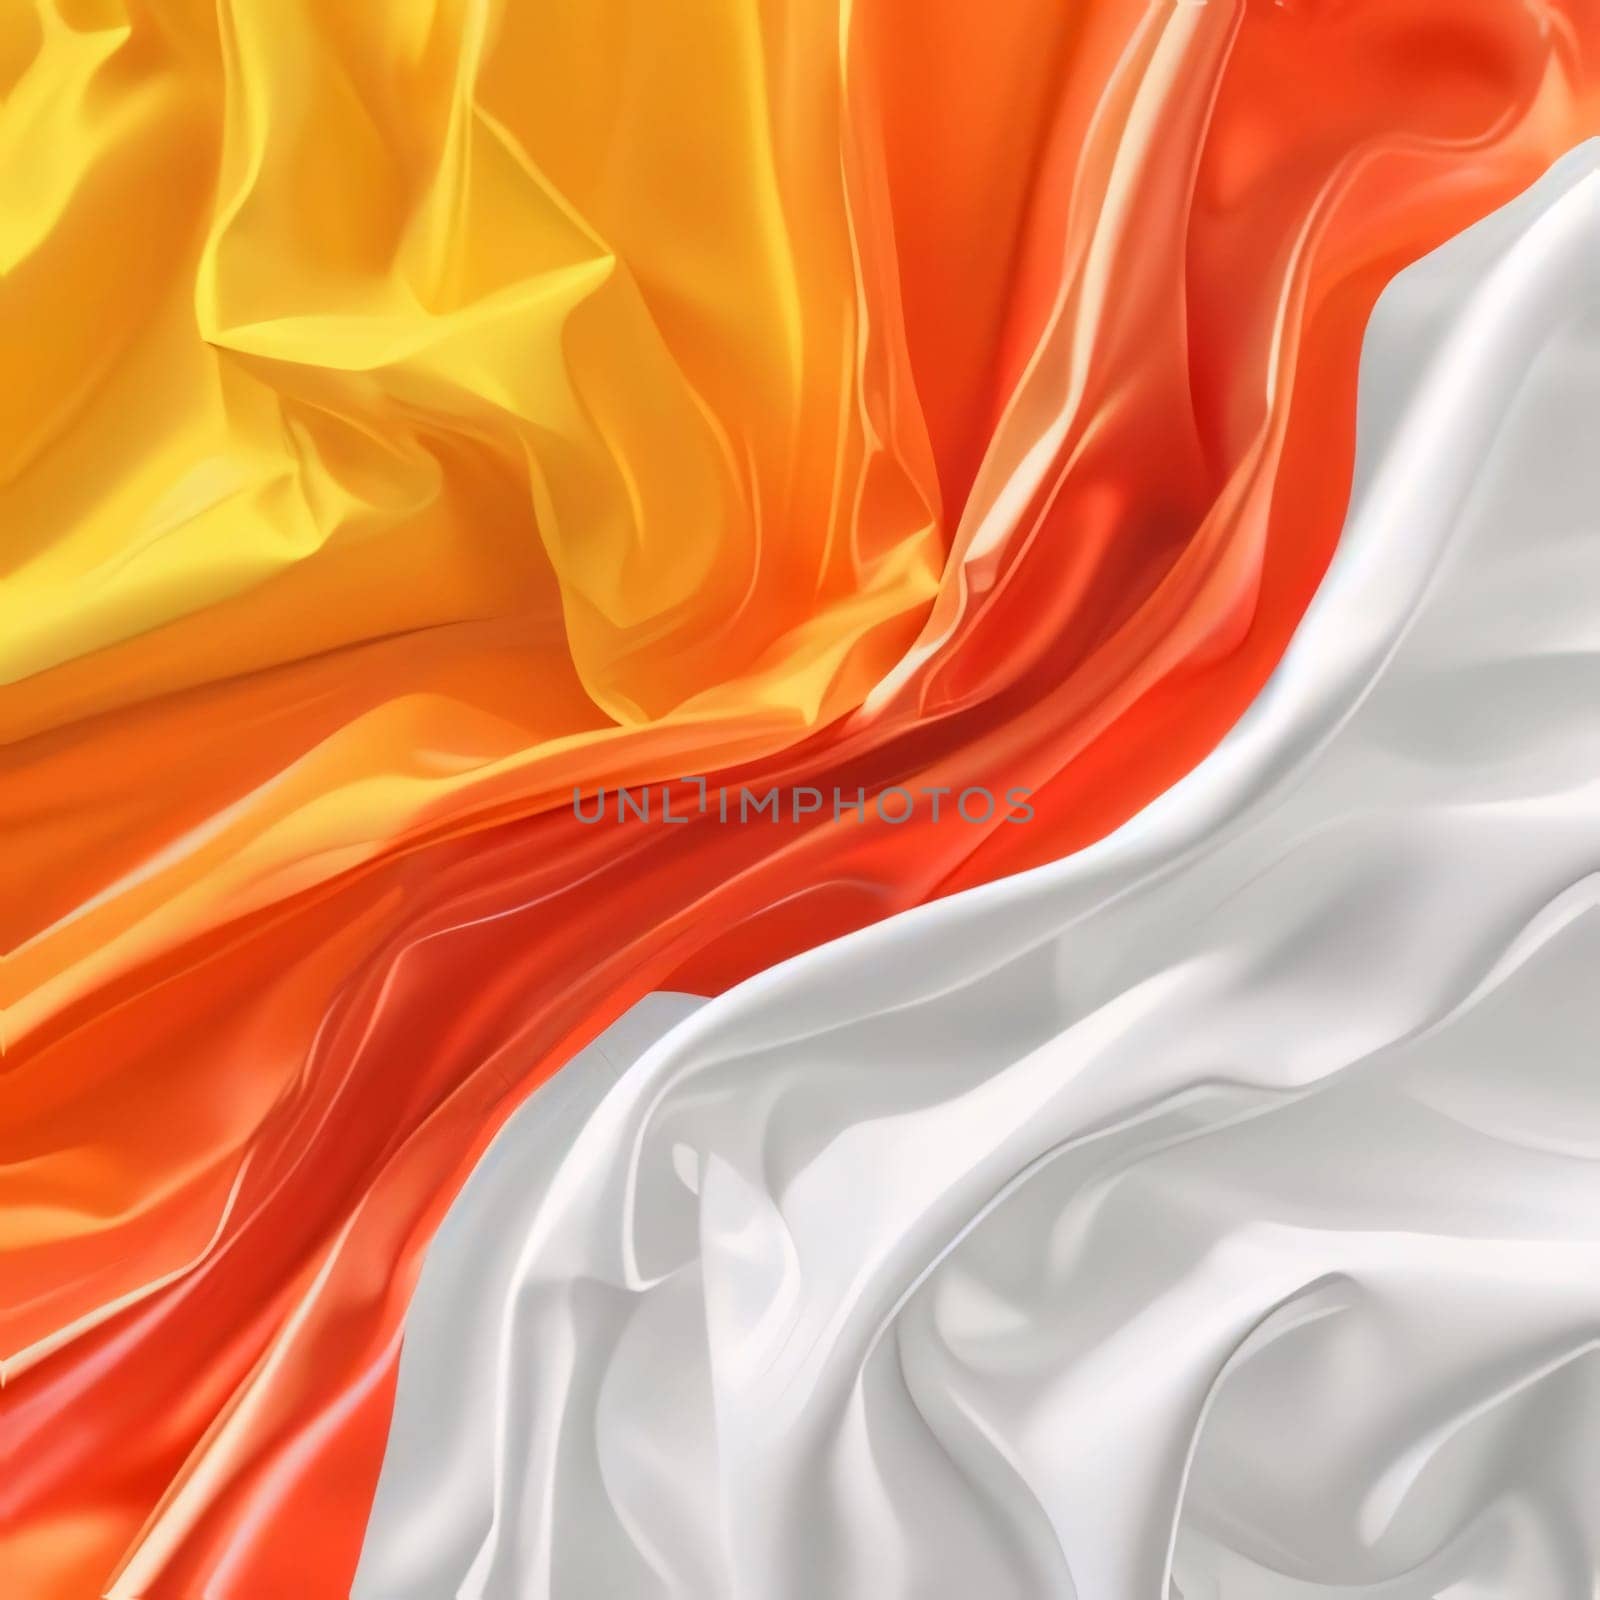 Abstract background design: Closeup of rippled white and orange silk satin fabric